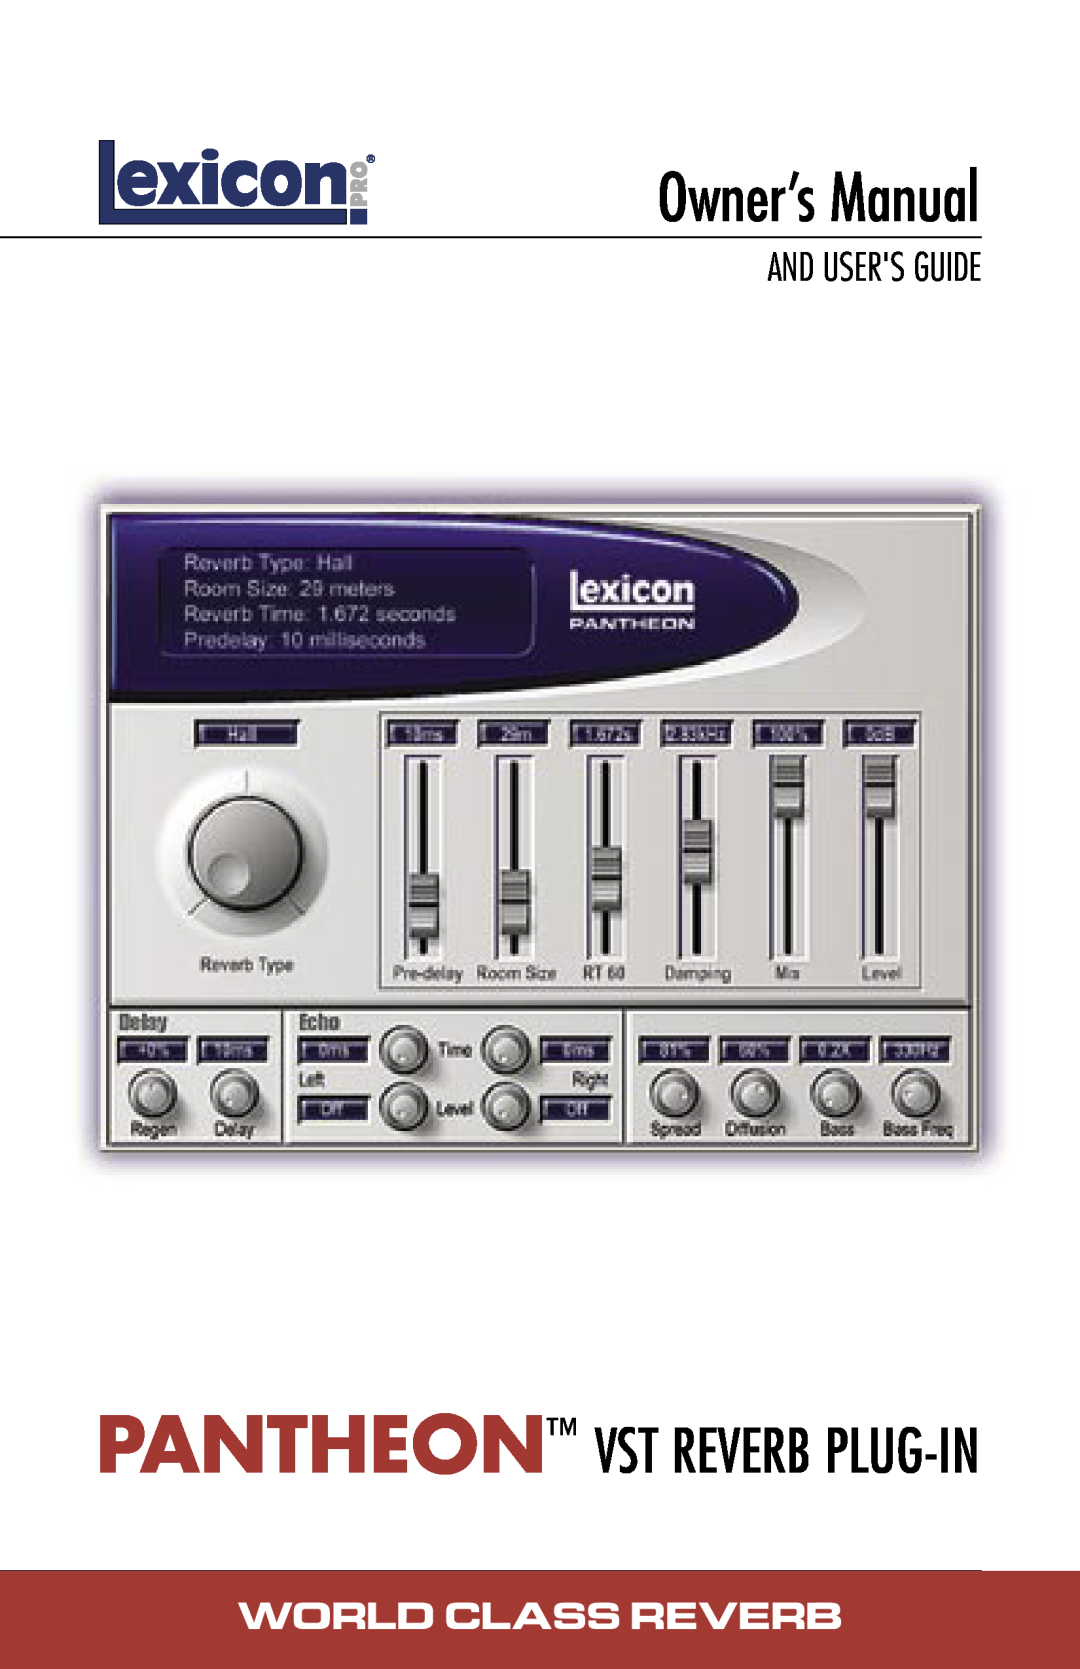 Lexicon musical instrument owner manual Owner’s Manual, Pantheon Vst Reverb Plug-In, And Users Guide, World Class Reverb 